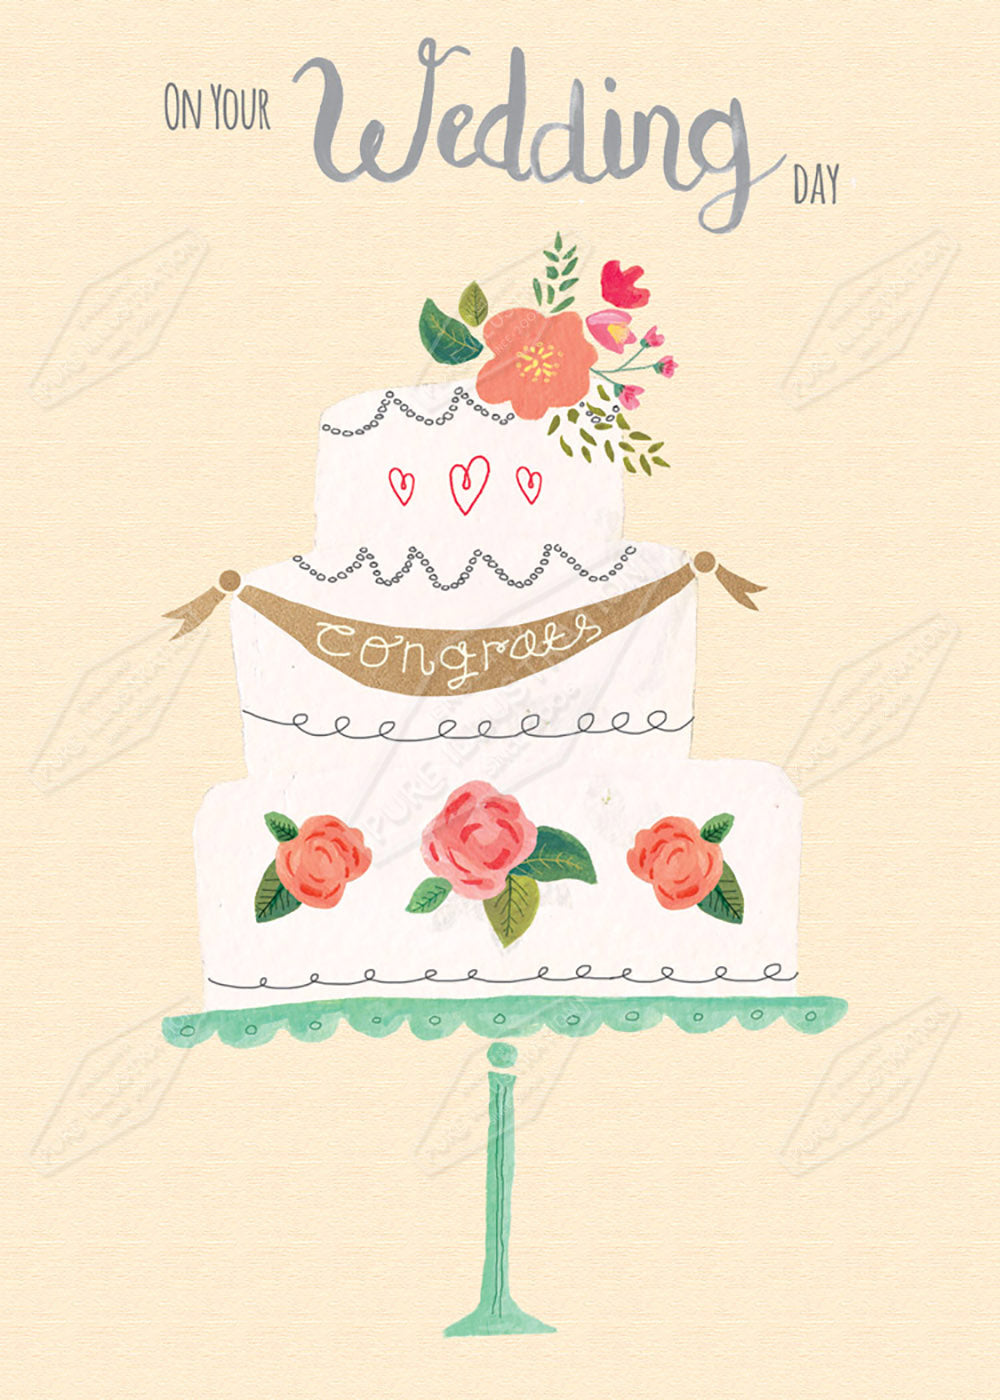 Wedding Cake by Cory Reid for Pure Art Licensing Agency & Surface Design Studio